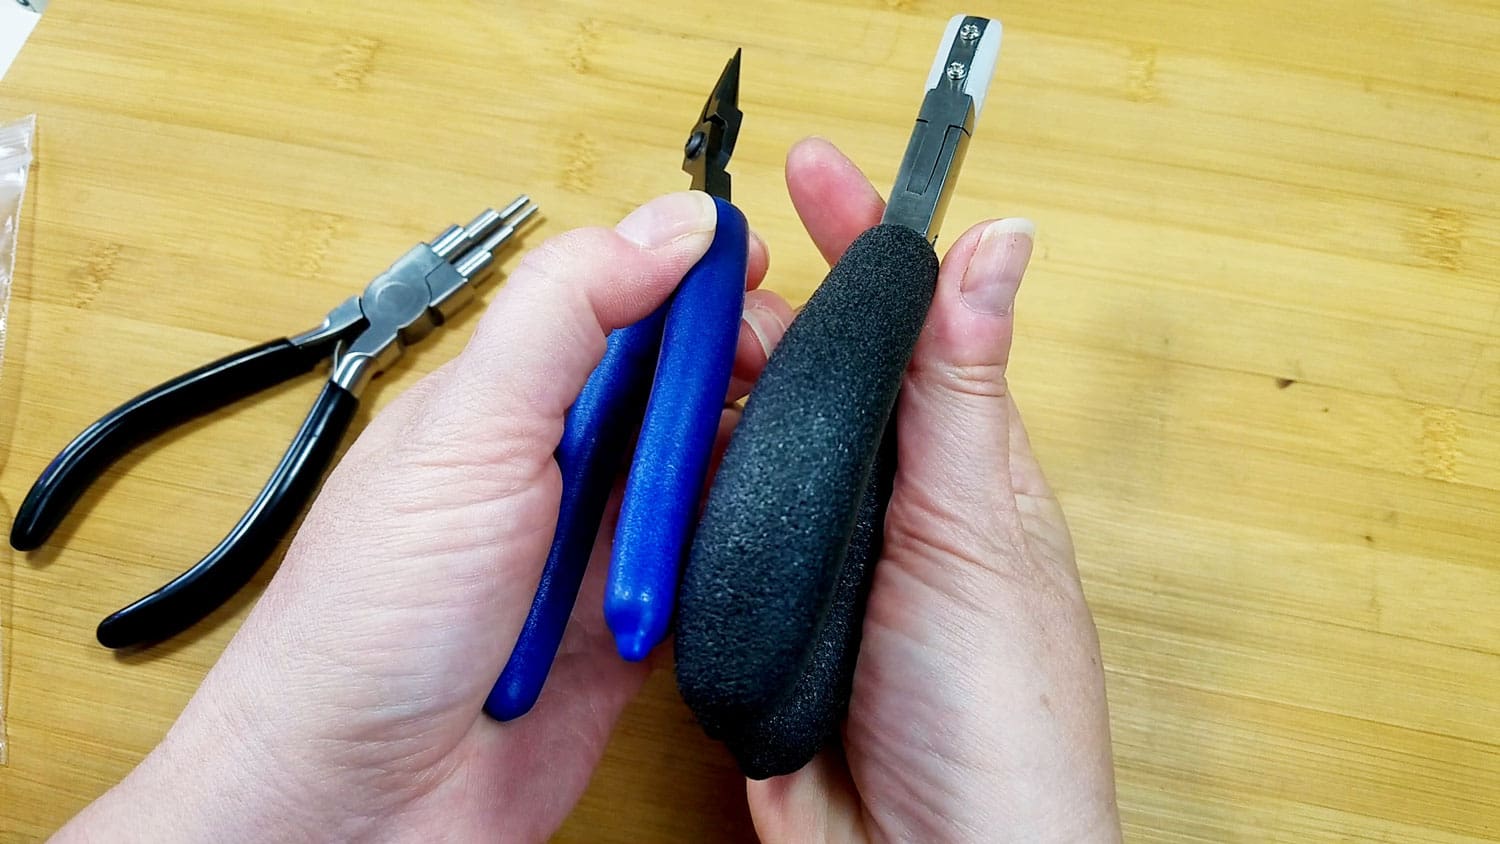 An image showing a side-by-side comparison of the grips on the author's professional grade Swanstrom pliers and her nylon jaw pliers after the new comfort grips were applied.